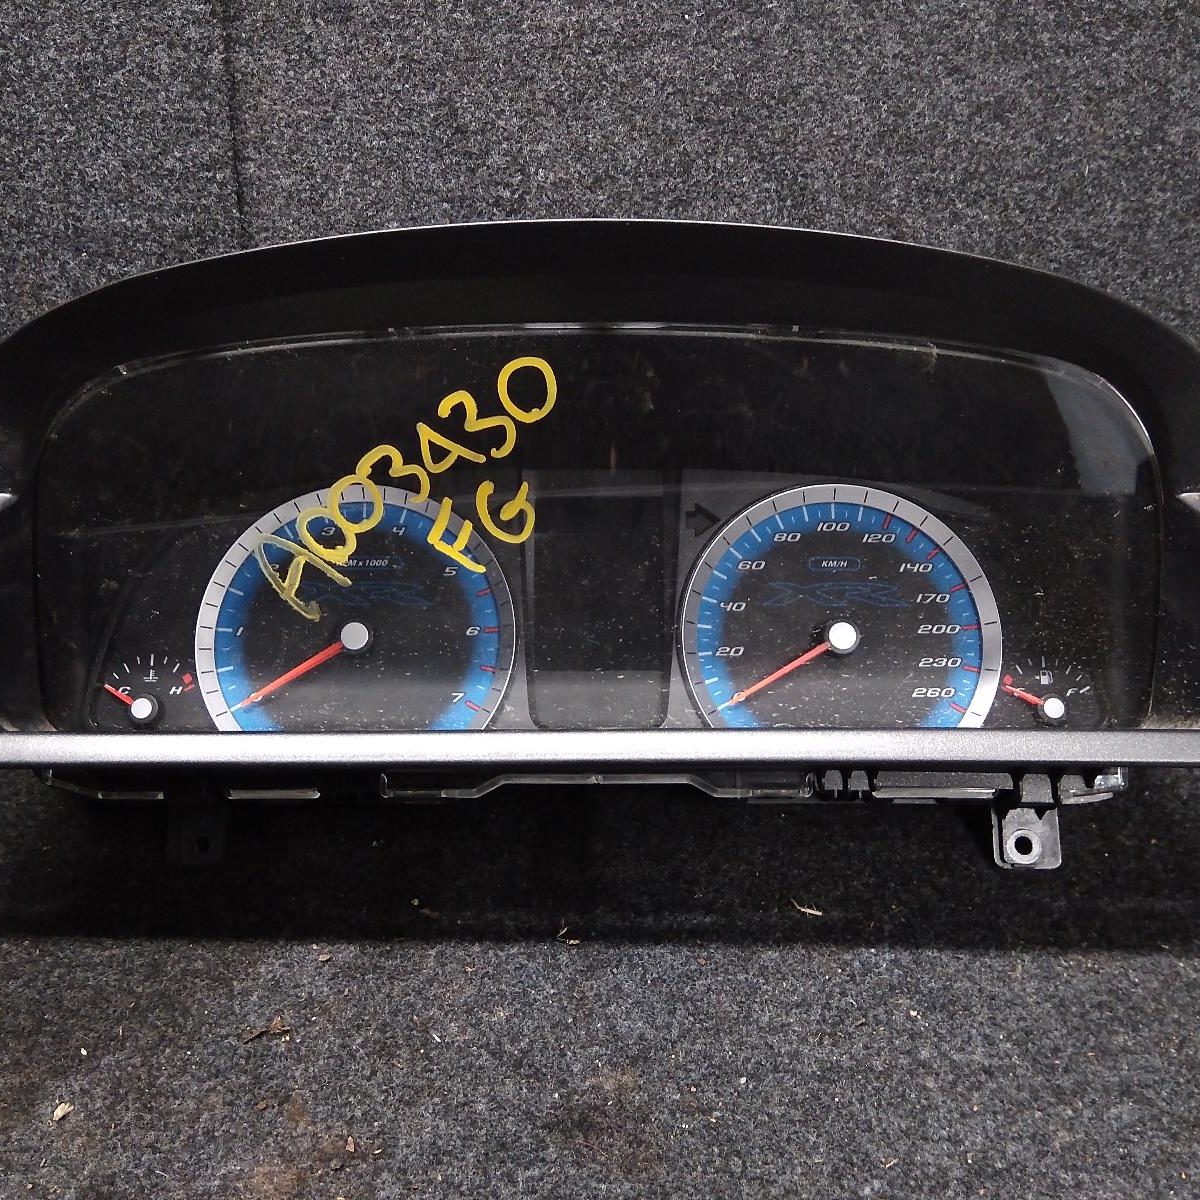 2010 FORD FALCON INSTRUMENT CLUSTER